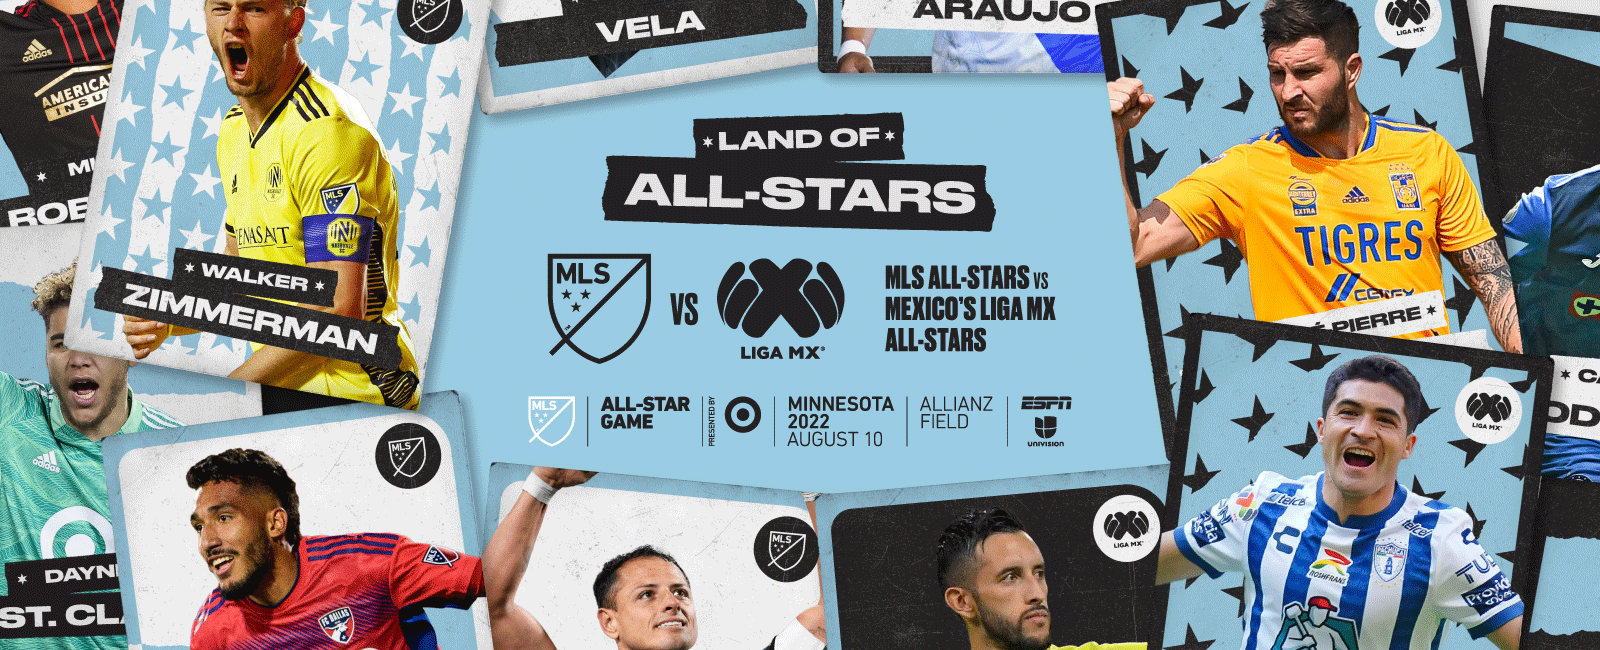 MLS All-Stars to face the LIGA MX All-Stars in the 2022 MLS All-Star Game  presented by Target